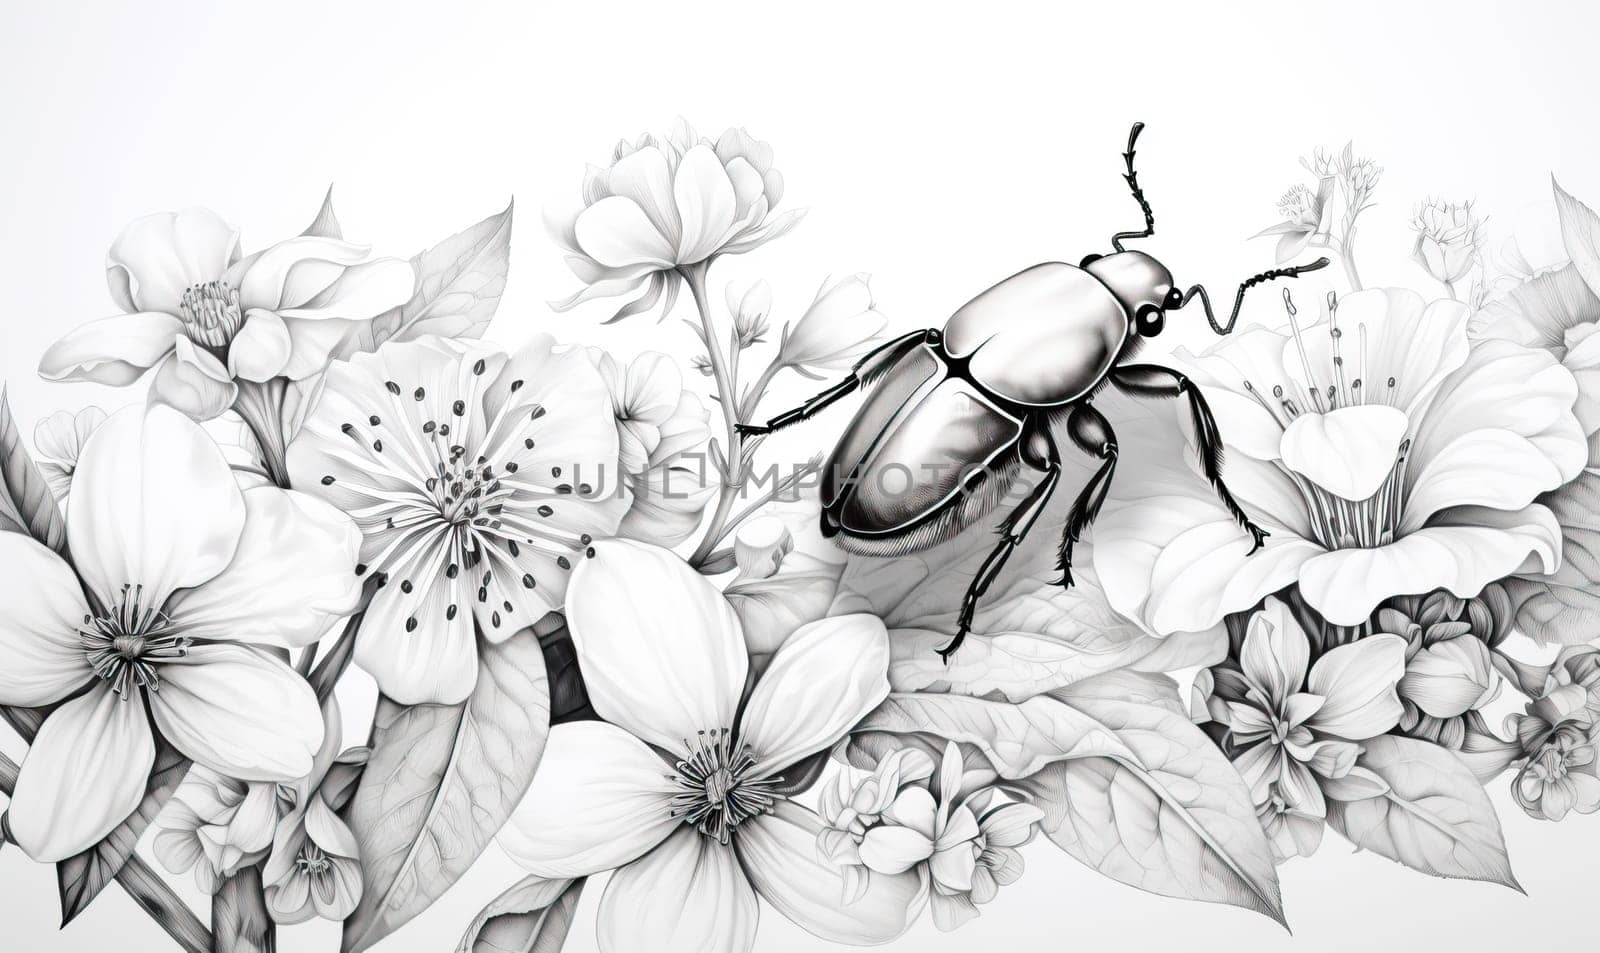 Black and white image of a beetle on flowers. by Fischeron